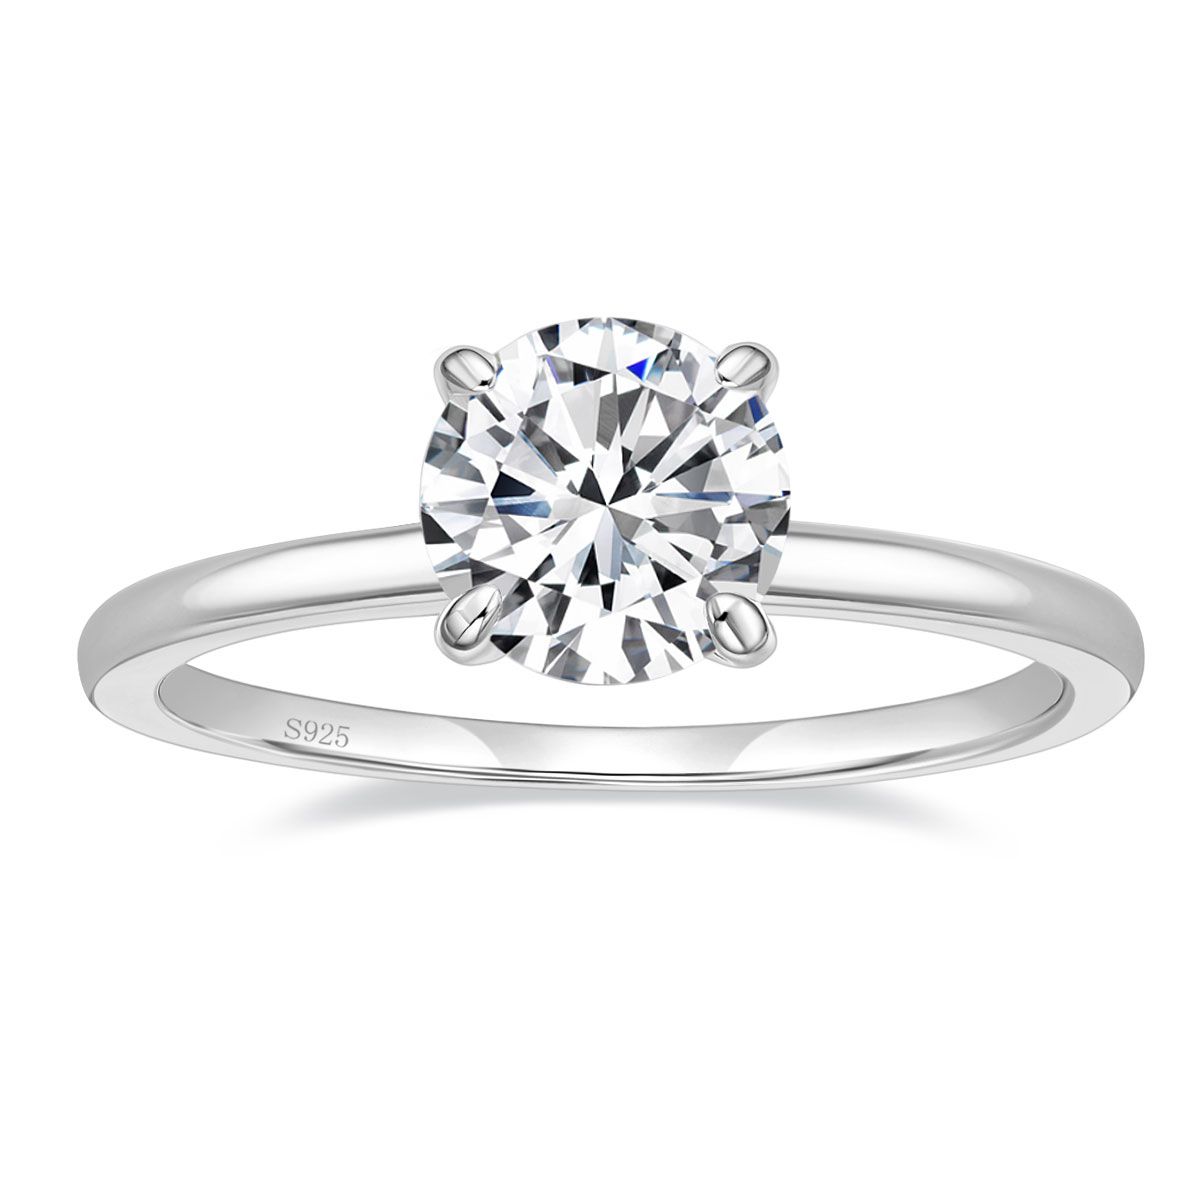 925 Sterling Silver Round Cut Solitaire Cubic Zirconia Ring